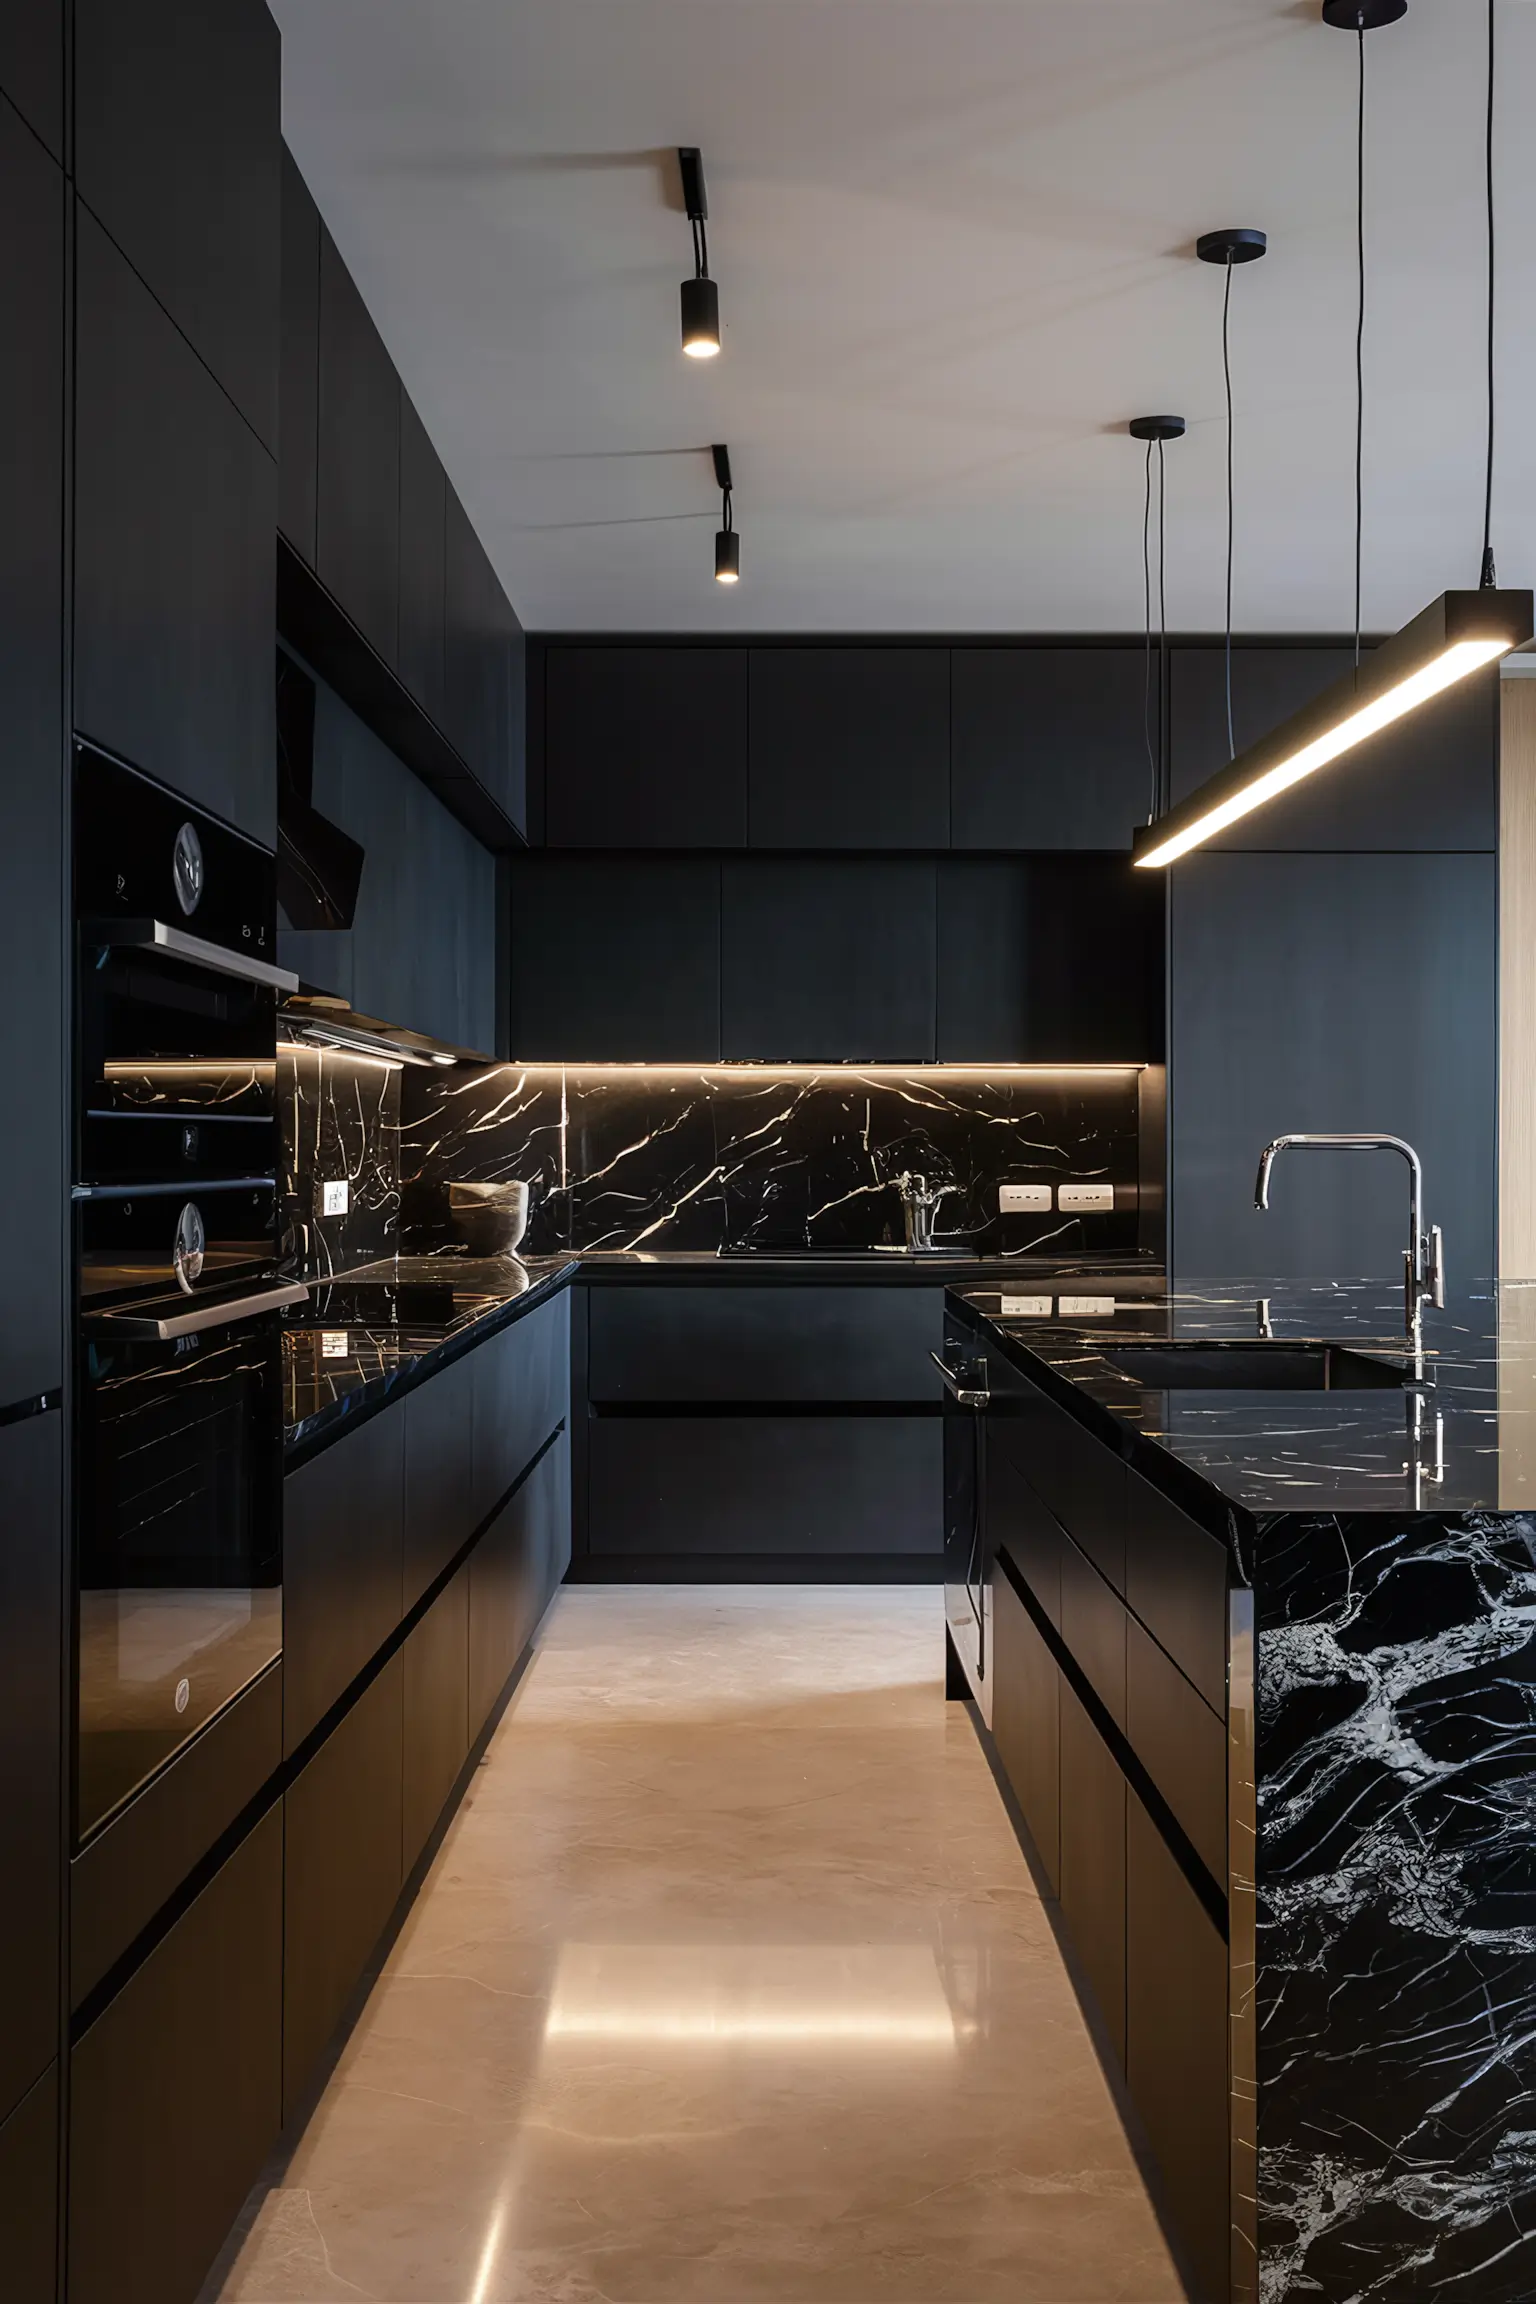 Chic black kitchen with sleek cabinetry, marble countertops, and modern lighting.